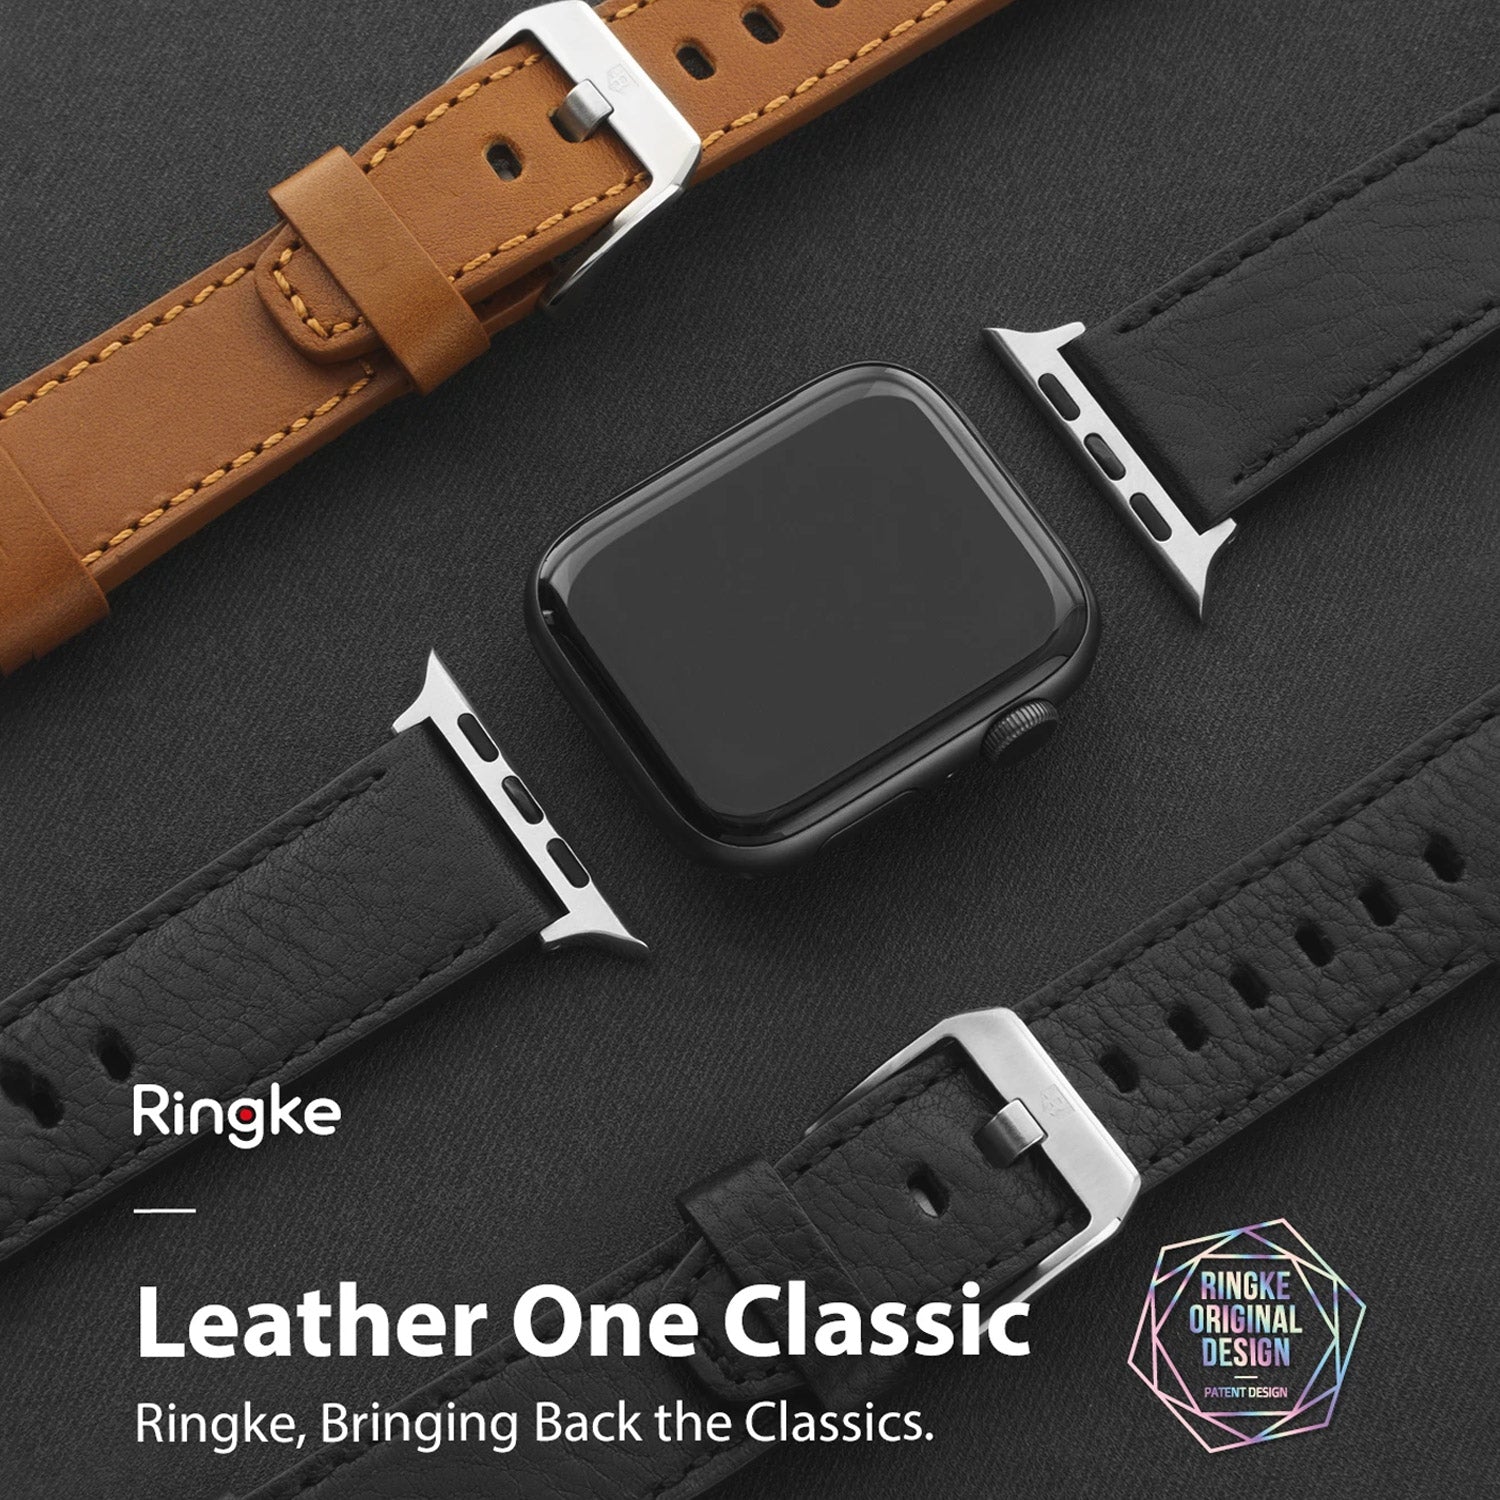 Ringke Apple Watch Band Series 1 2 3 42mm Leather One Classic Band Black